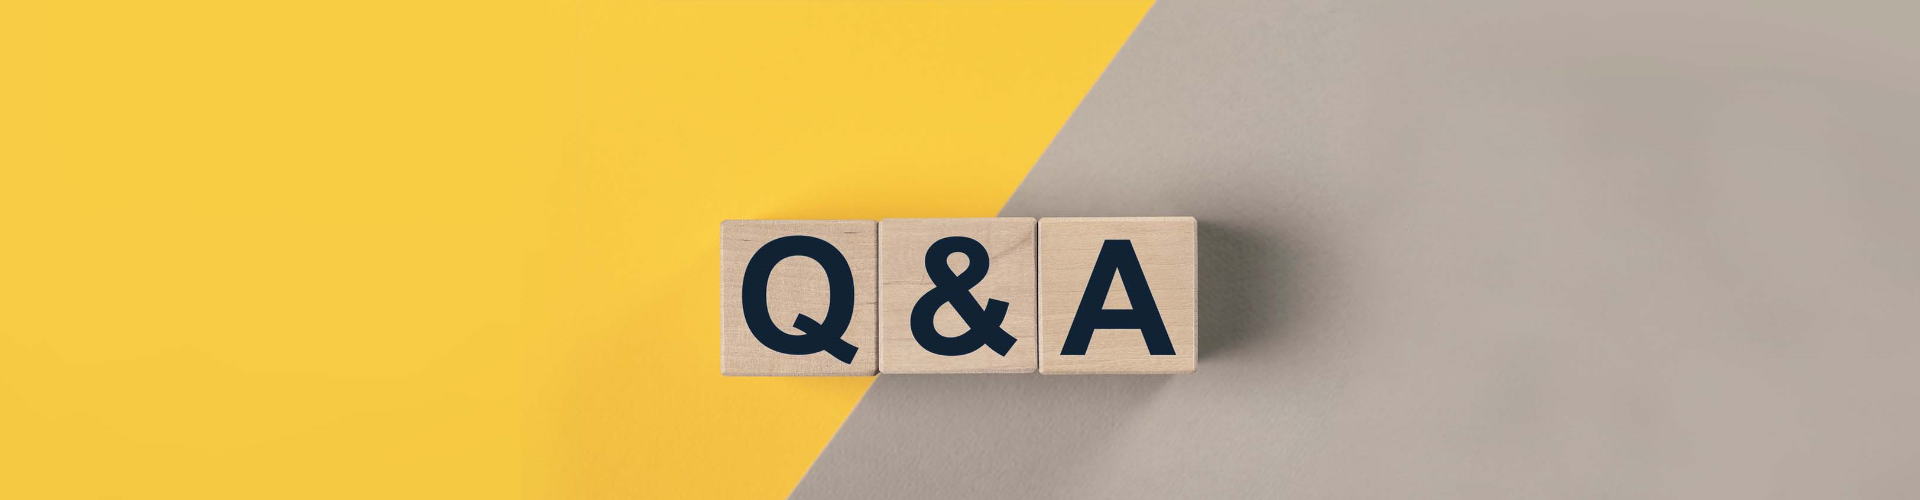 qa-or-q-concept-qna-acronym-on-wooden-cubes-on-gray-and-yellow-surface-with-copy-space